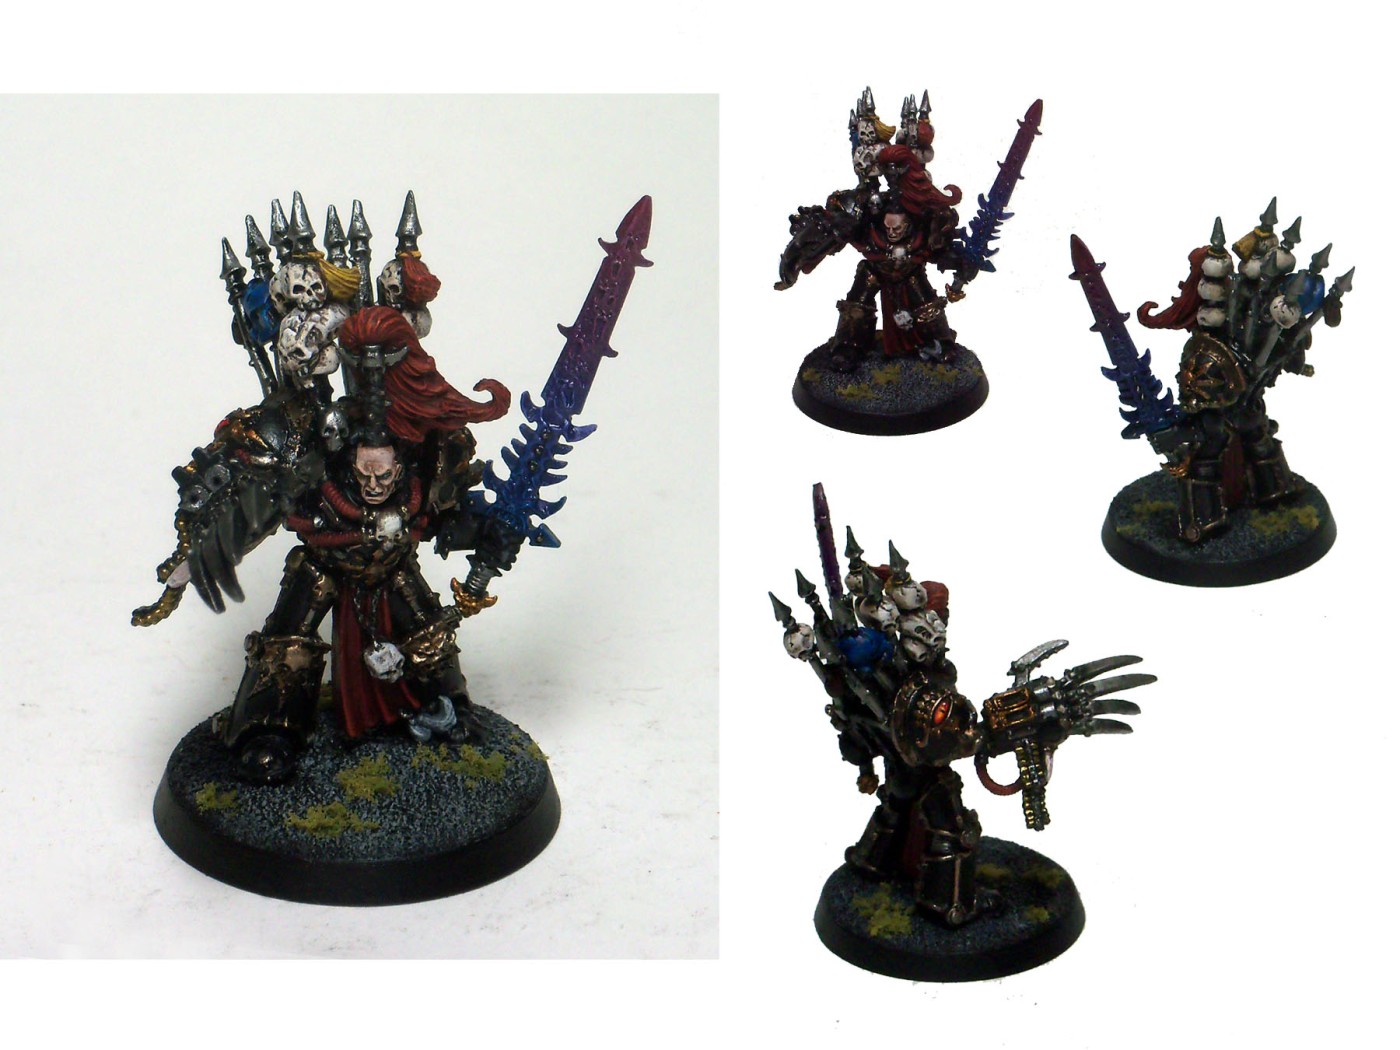 In my years as a miniatures painter and gamer, I’ve somehow never...